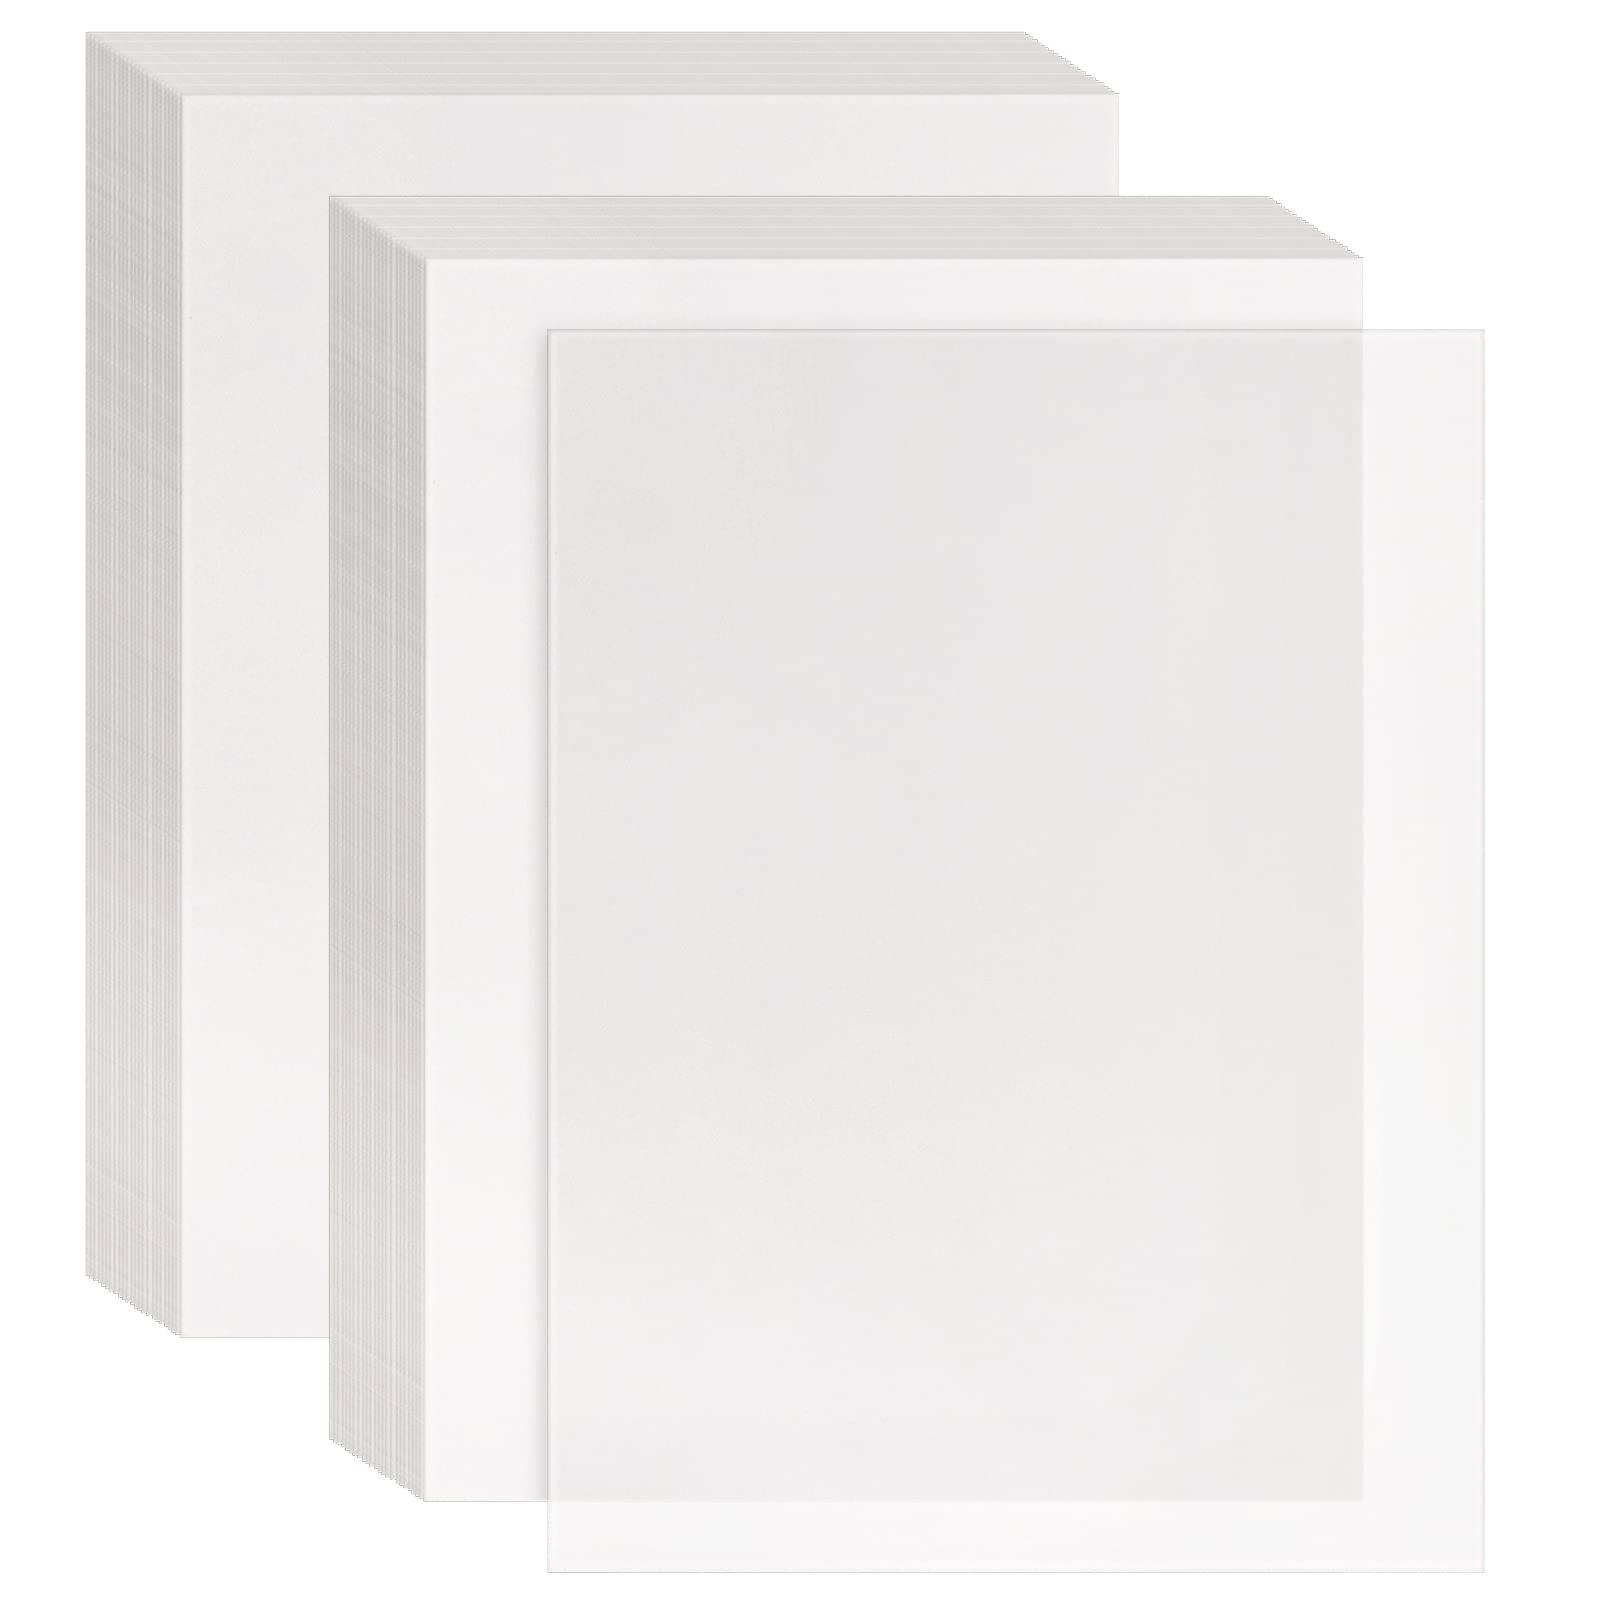 FSWCCK 150 Sheets Translucent Tracing Vellum Paper Printable 8.5 x 11  Inches for Invitations, Envelopes, Scrapbook